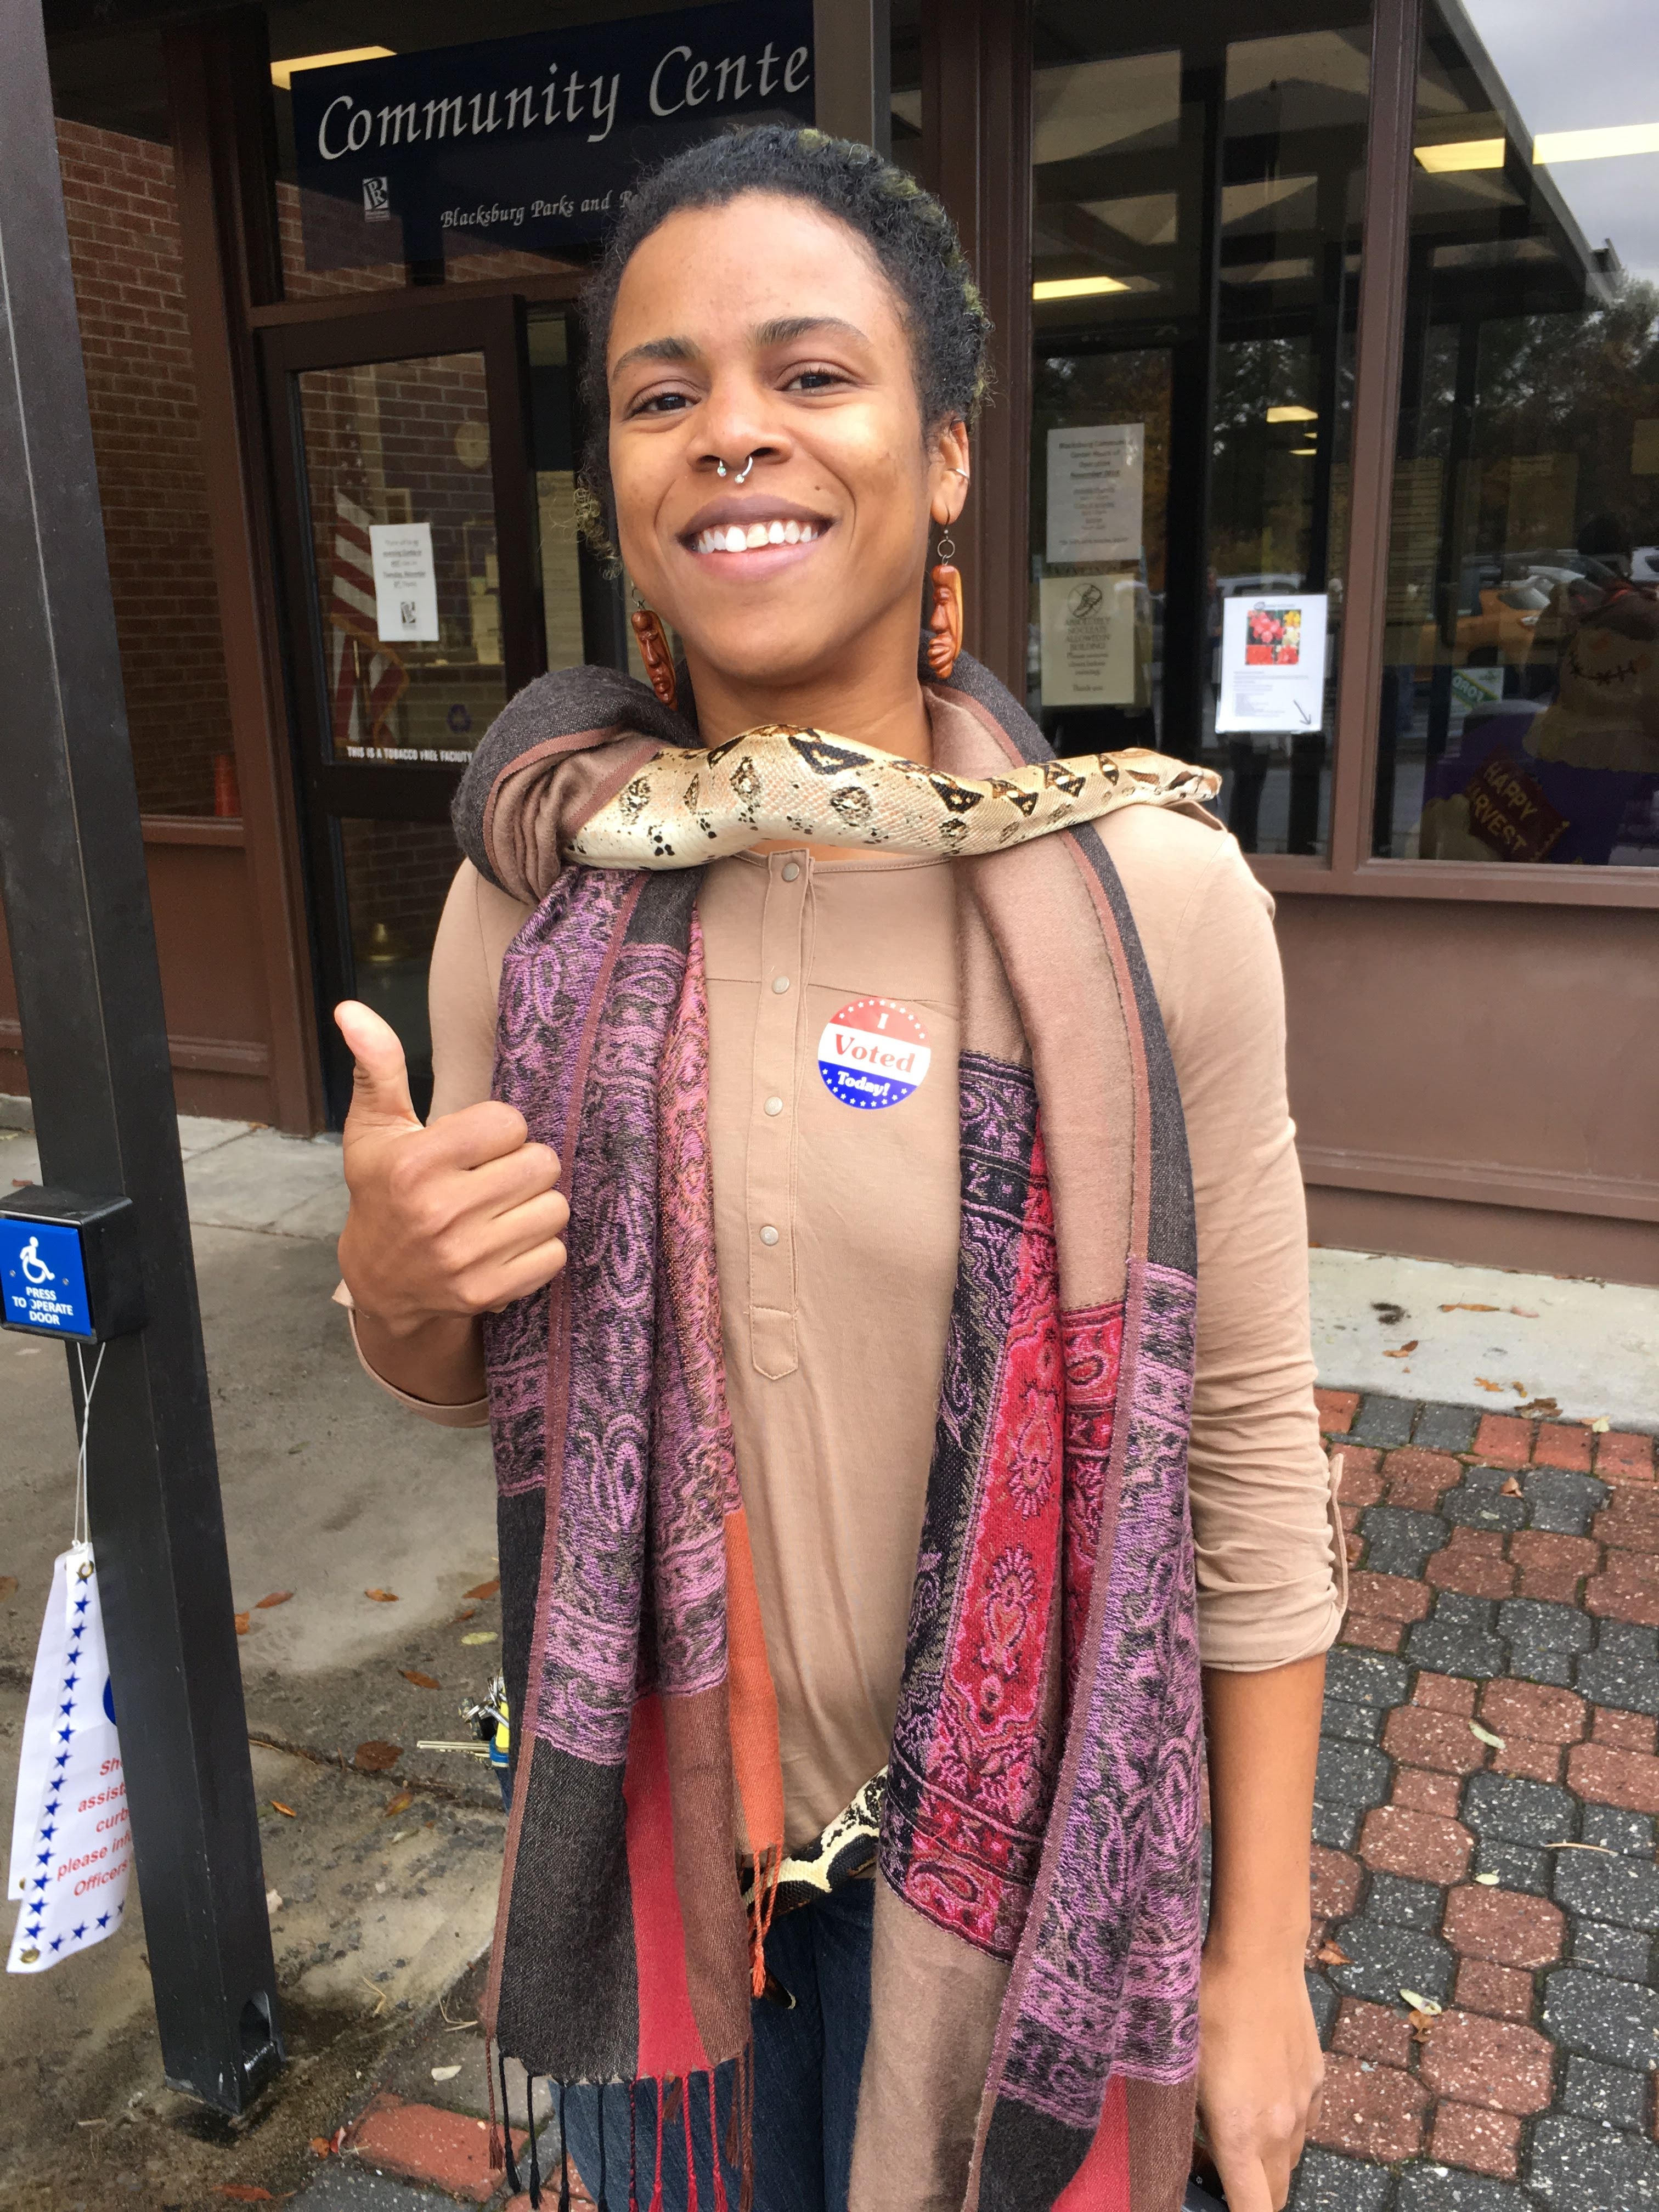 This photo shows a young woman wearing a light beige sweater, a pink and purple patterned scarf around her neck and dangling down her front, and a large snake around her neck. She has an "I voted" sticker on her sweater and is smiling at the camera and giving it a thumbs up.